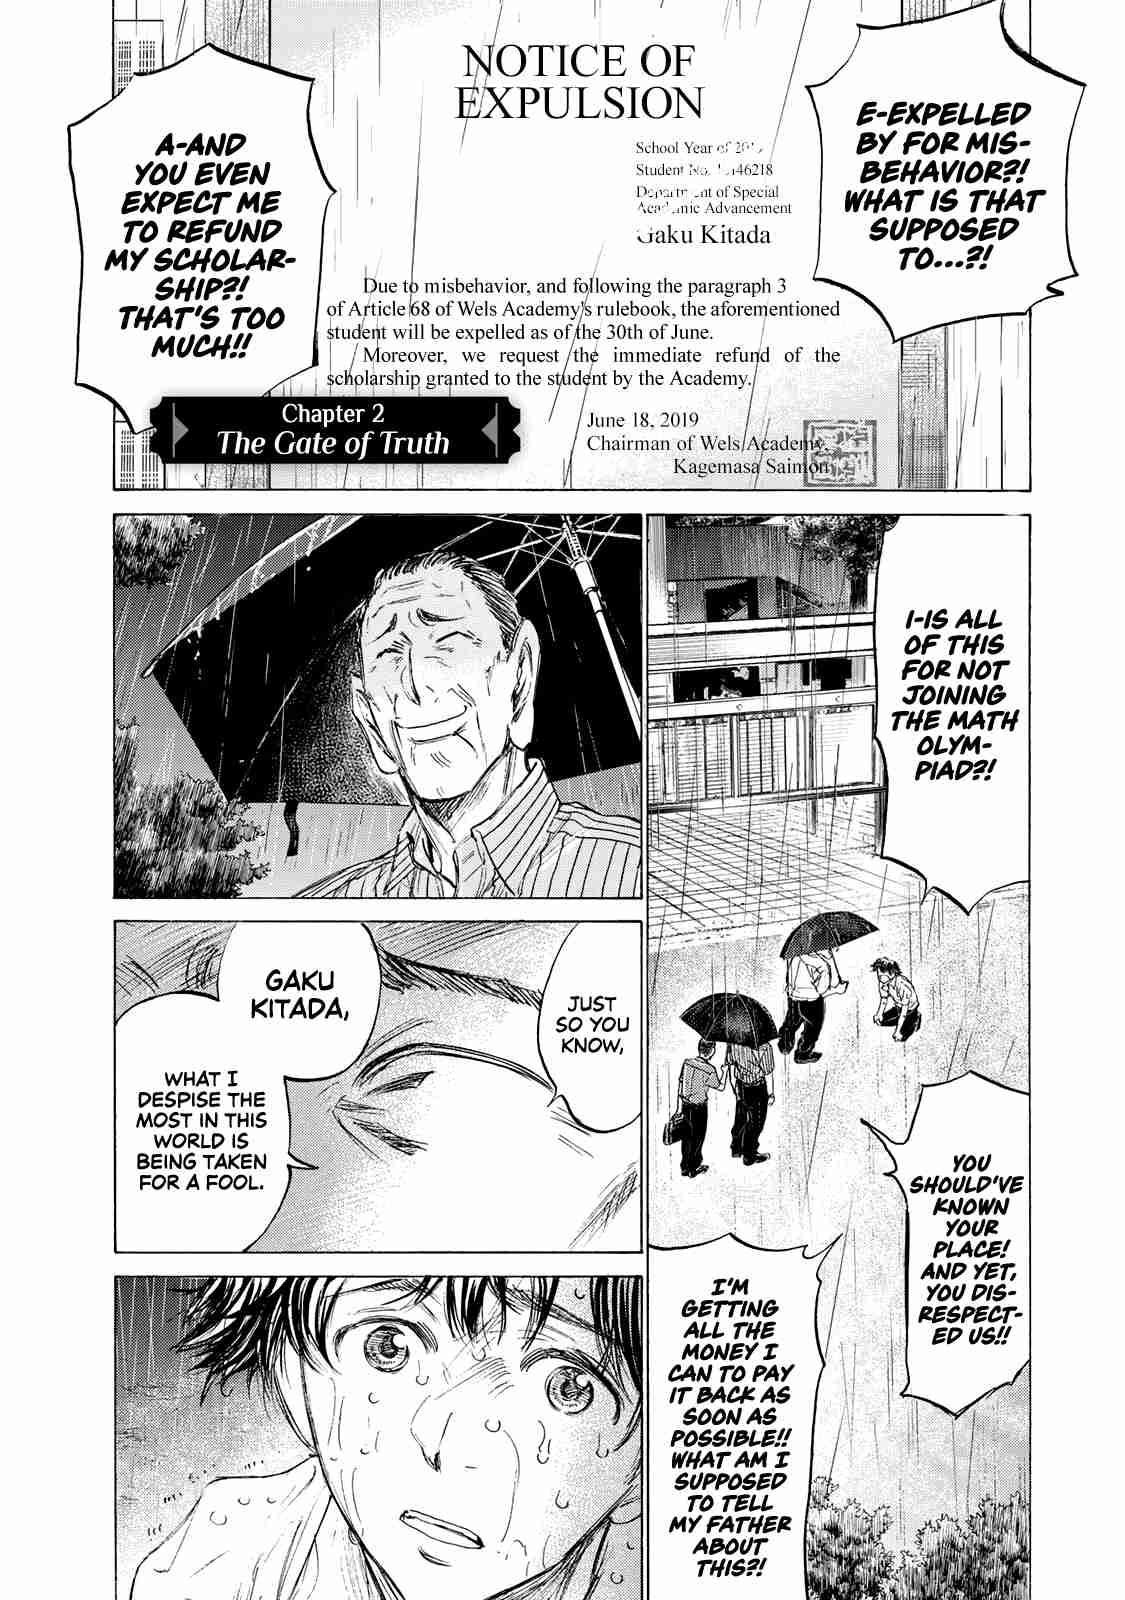 Fermat no Ryouri Vol. 1 Ch. 2 The Gate of Truth